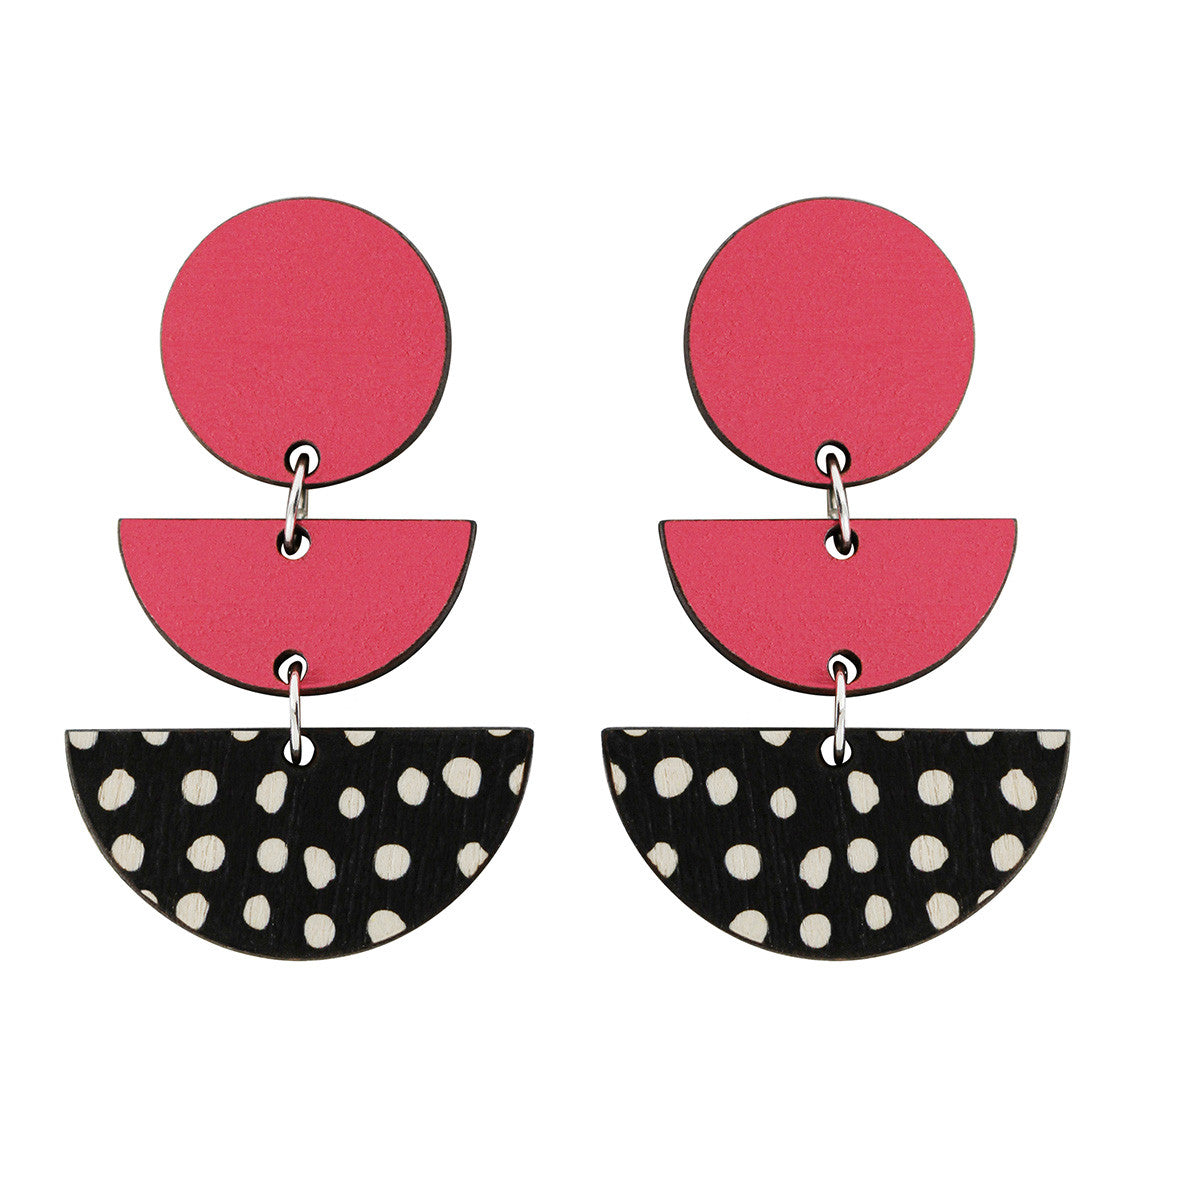 3 tiered earrings with spots in pink